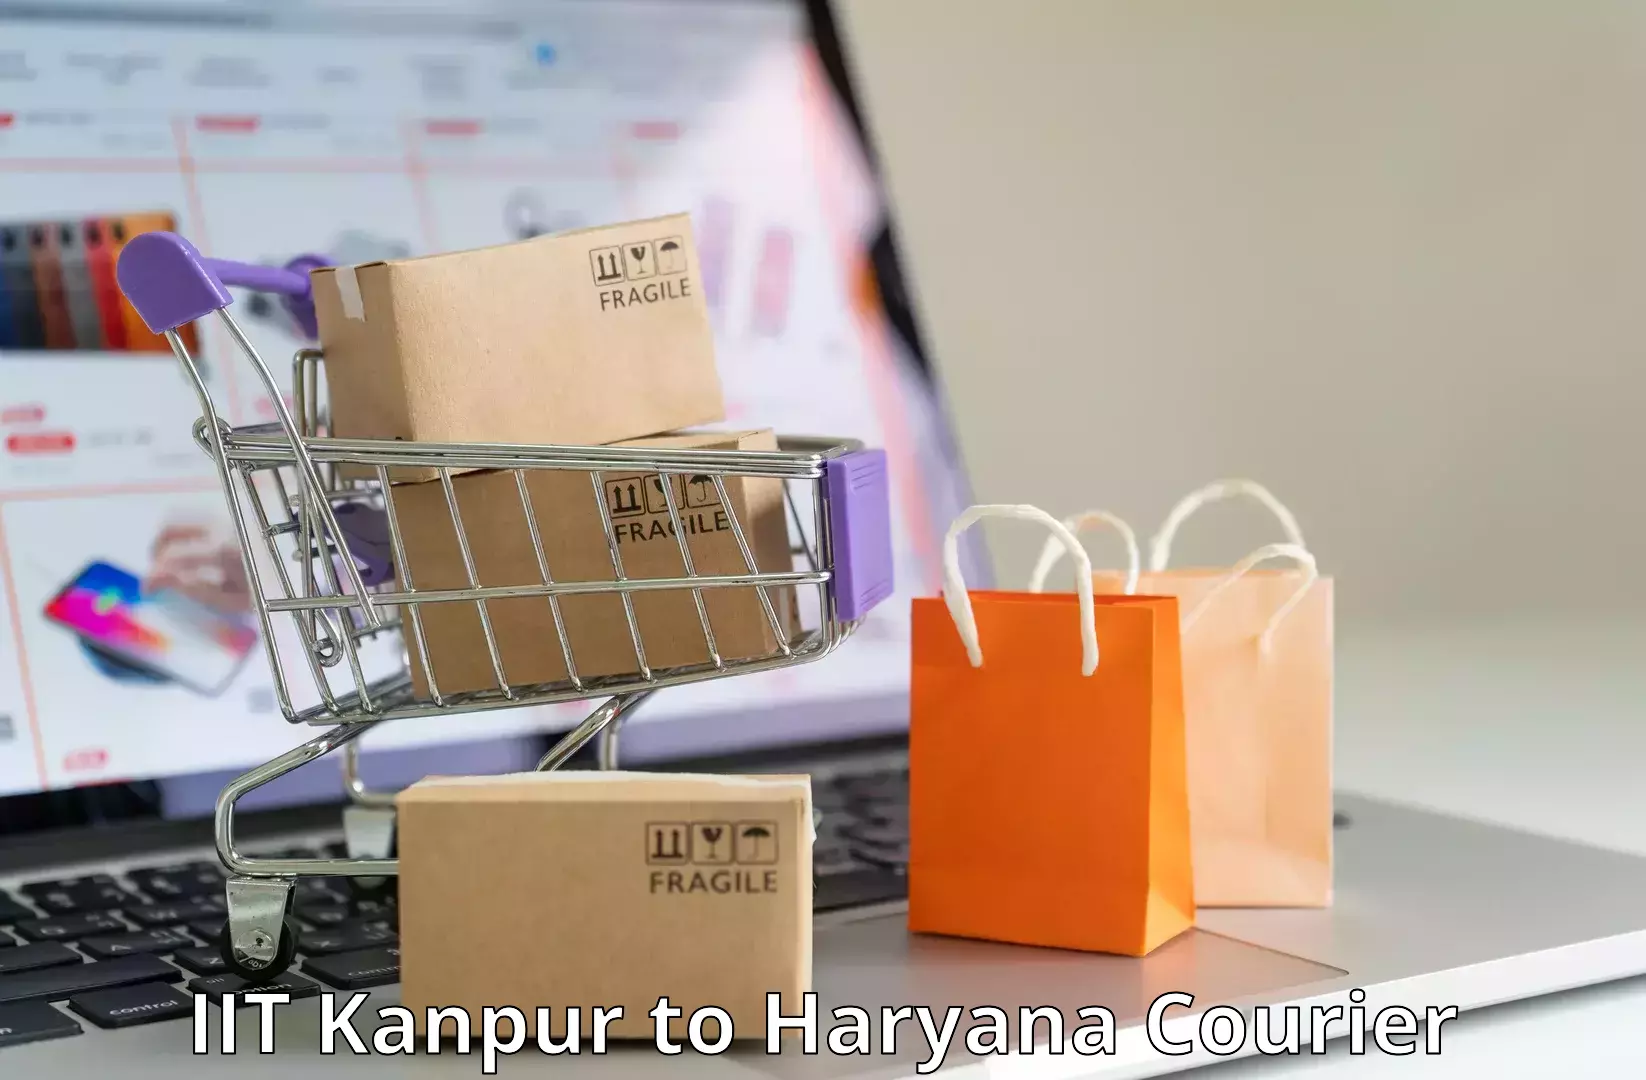 On-call courier service IIT Kanpur to Gurugram